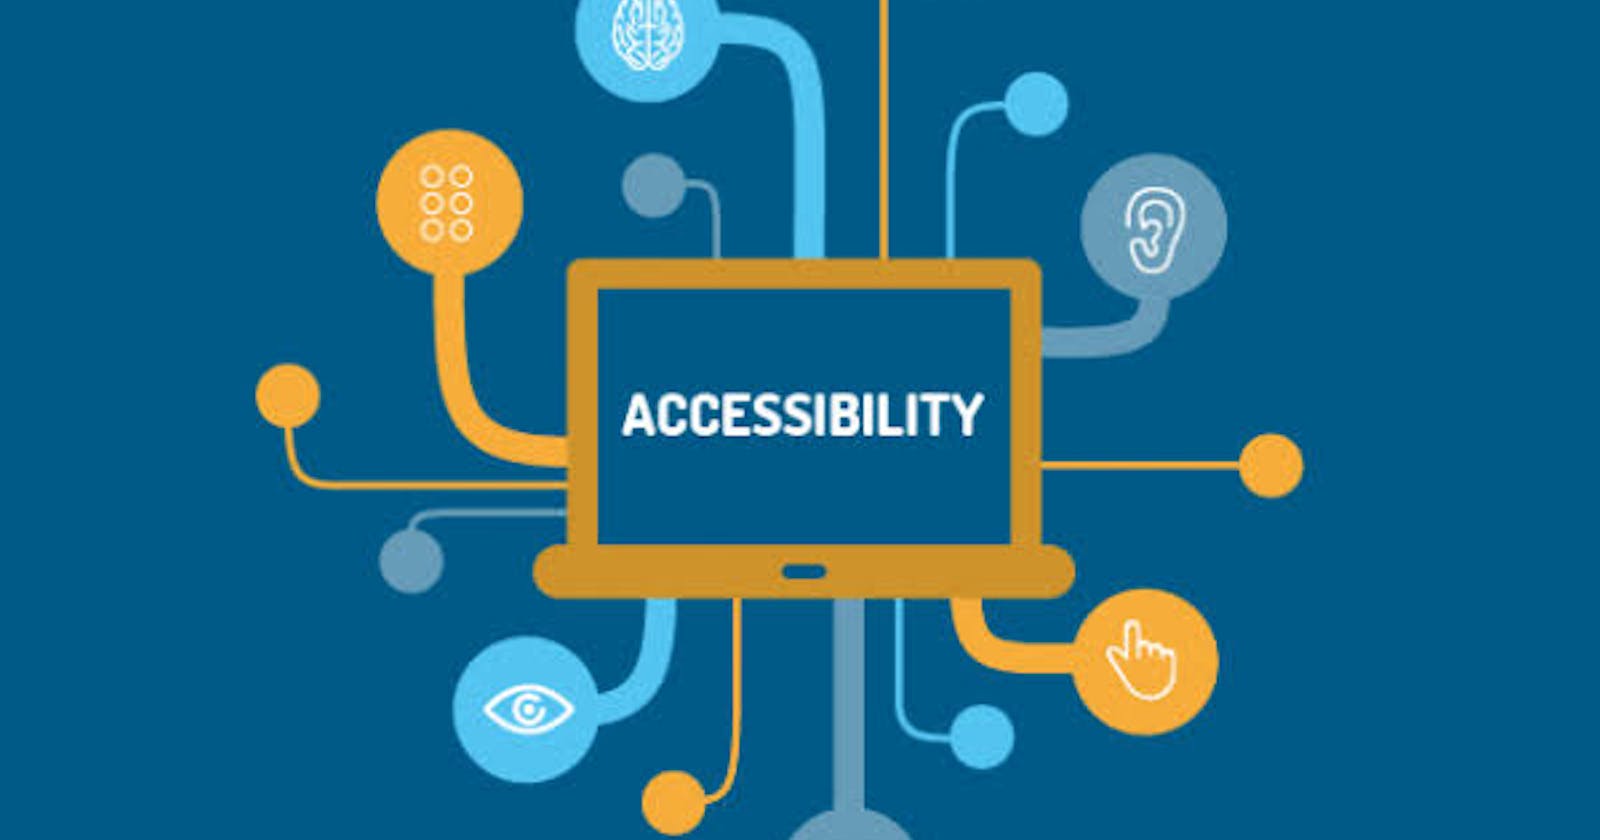 9 Tips To Help Improve Accessibility On A Web Page